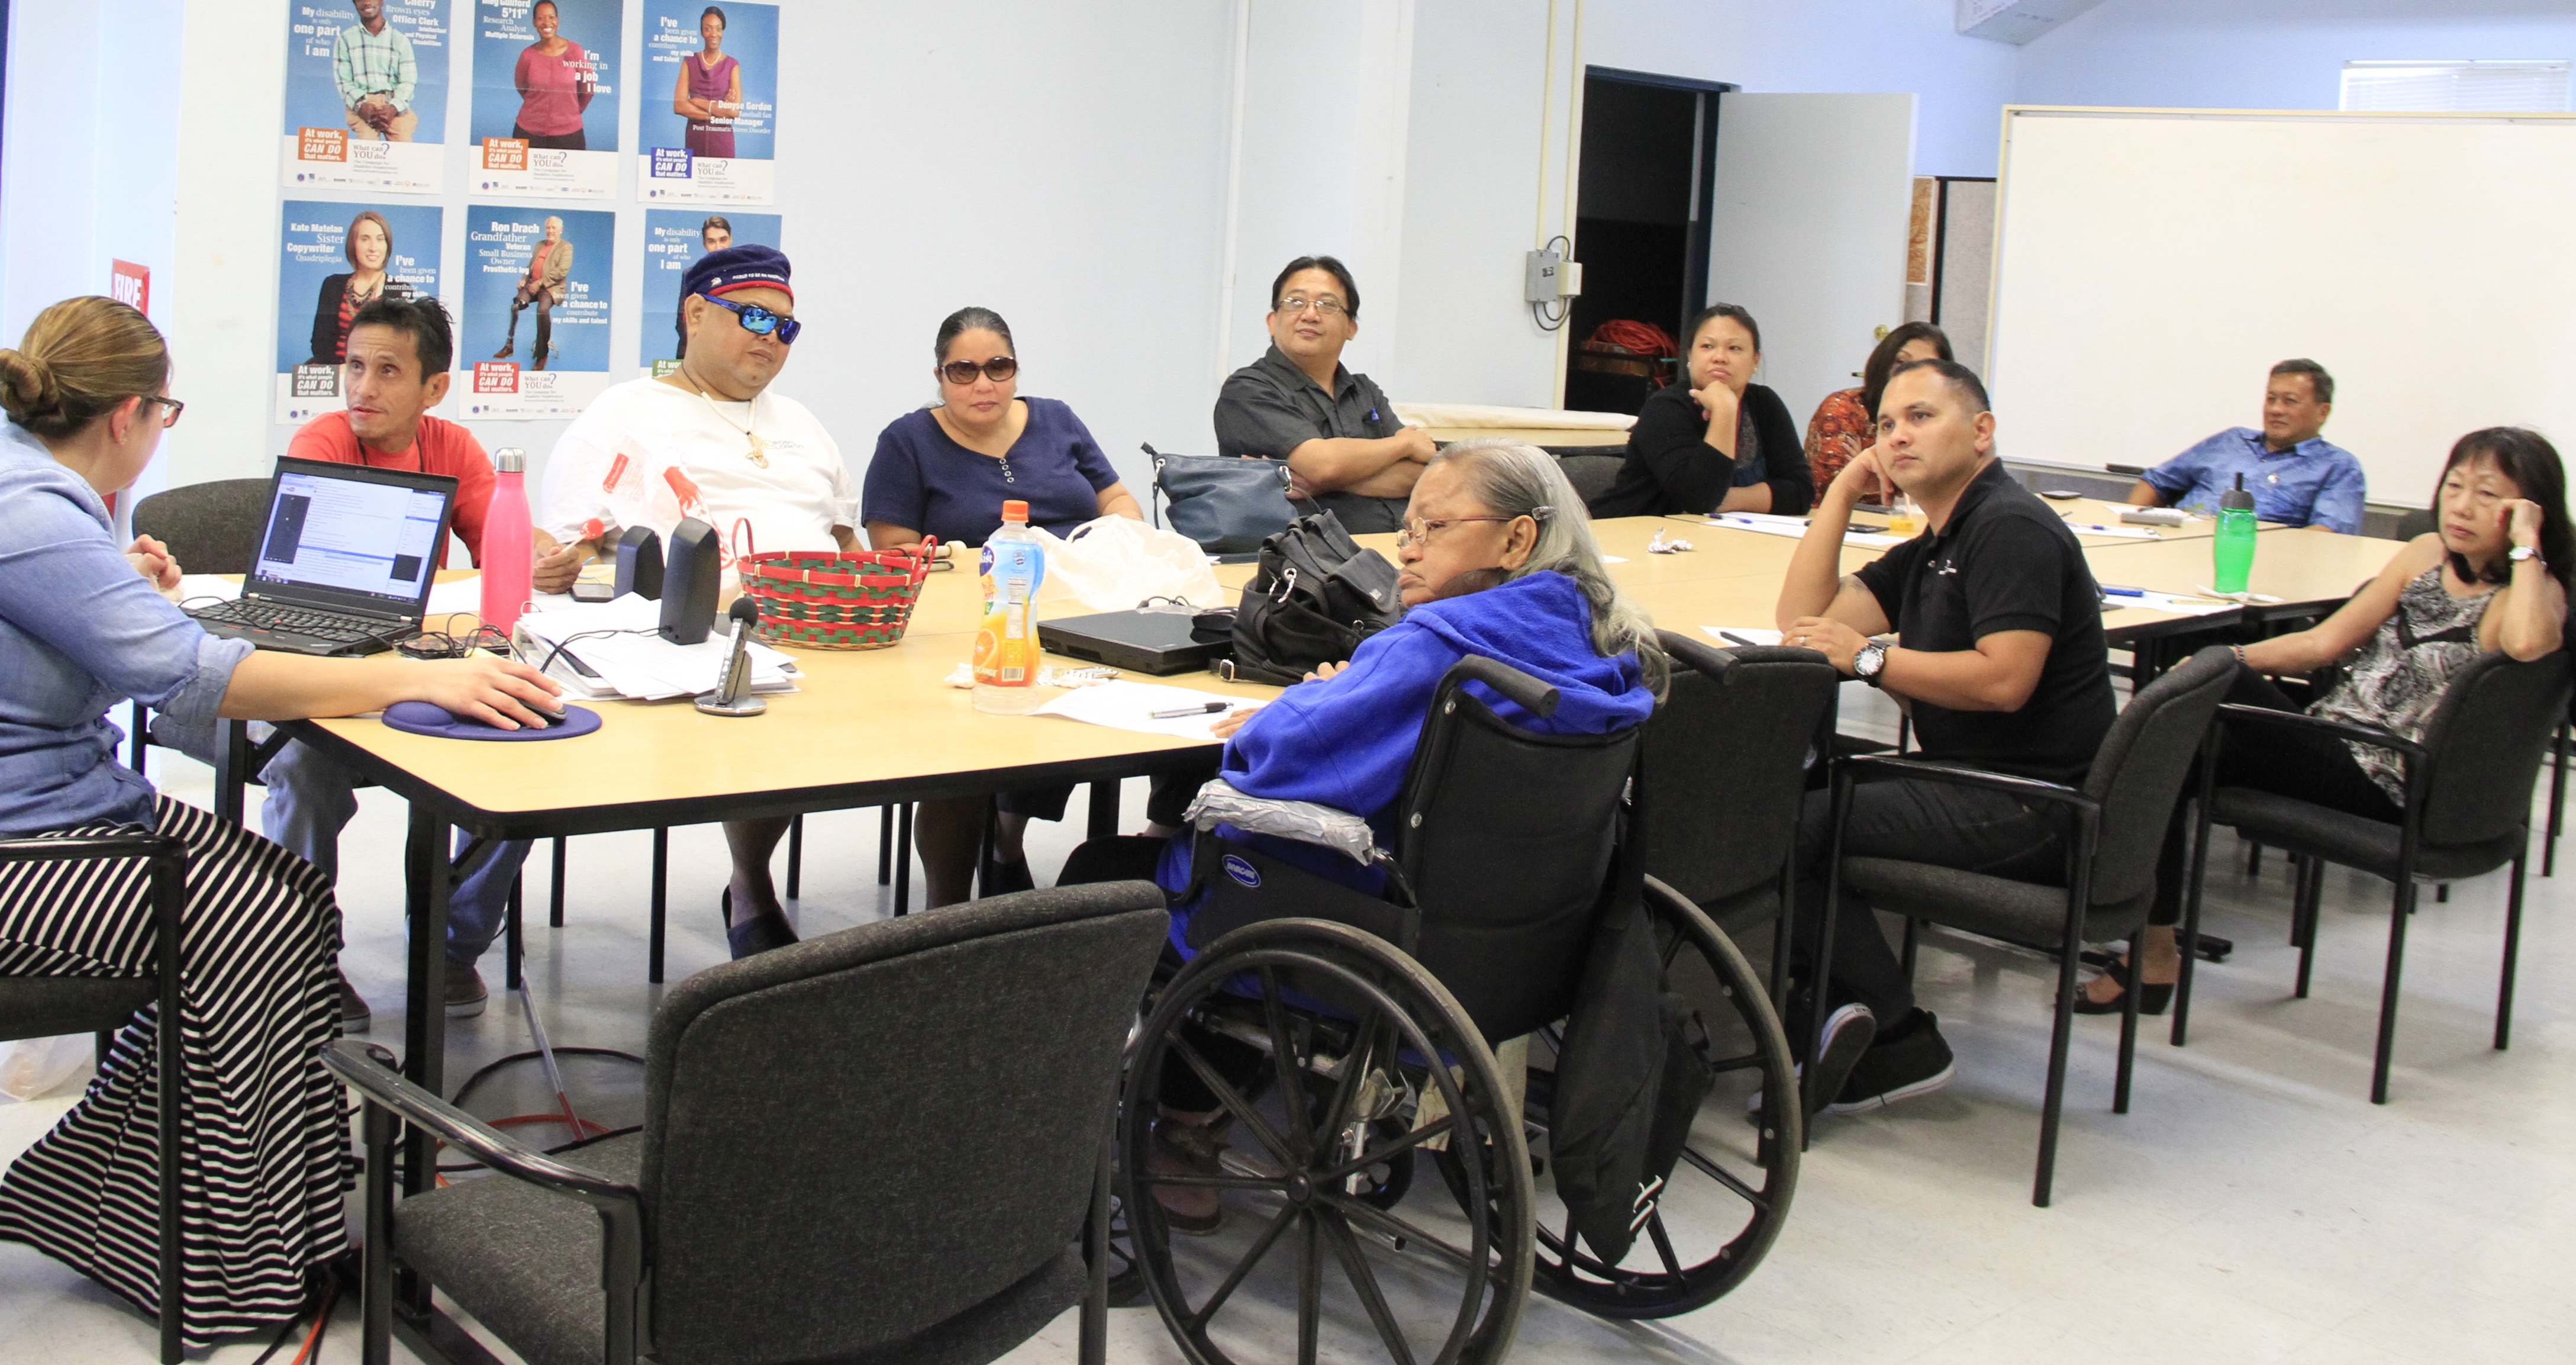 The GSAT Conference & Fair Committee held its 2nd meeting on January 12, 2016. Attending the meeting were (L-R), Carla Torres, GSAT Assistive Technology and Special Projects Coordinator;  Rudy Ignacio, Vice Chairperson;  Roy Rosario, Member at Large; Lisa Ogo, Member at Large;  Raymond Sayas, Guam Development Disabilities Council representative; Jennifer Vicente, Guam Legal Services – Disability Law Center representative; Karen Taitano Primacio (partially hidden), Agency for Human Resources Development / Workforce Investment Act representative; and Ben Servino, Department of Integrated Services for Persons with Disabilities / Division of Vocational Rehabilitation & Division of Support Services representative; (front, L-R): Josephine Cortez; Jack Larimer, Guam Department of Education representative; and Lou Mesa, Member at Large. The Annual AT Conference is scheduled for March 4, and the Fair is scheduled for March 19, 2016.